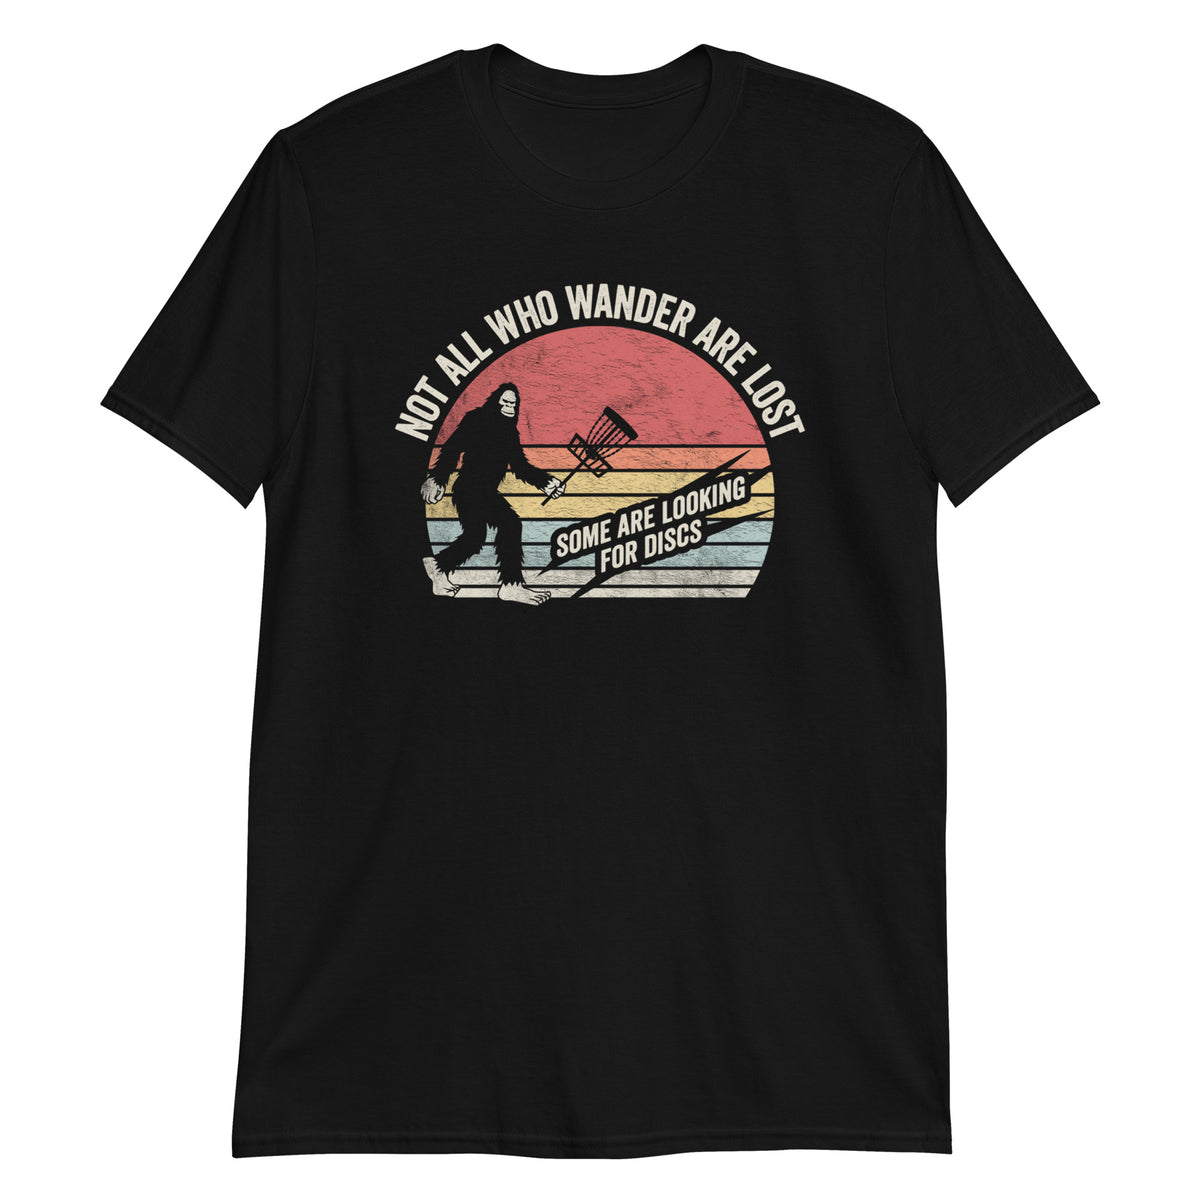 Not All Who Wander are Lose Some are Looking for Discs T-Shirt